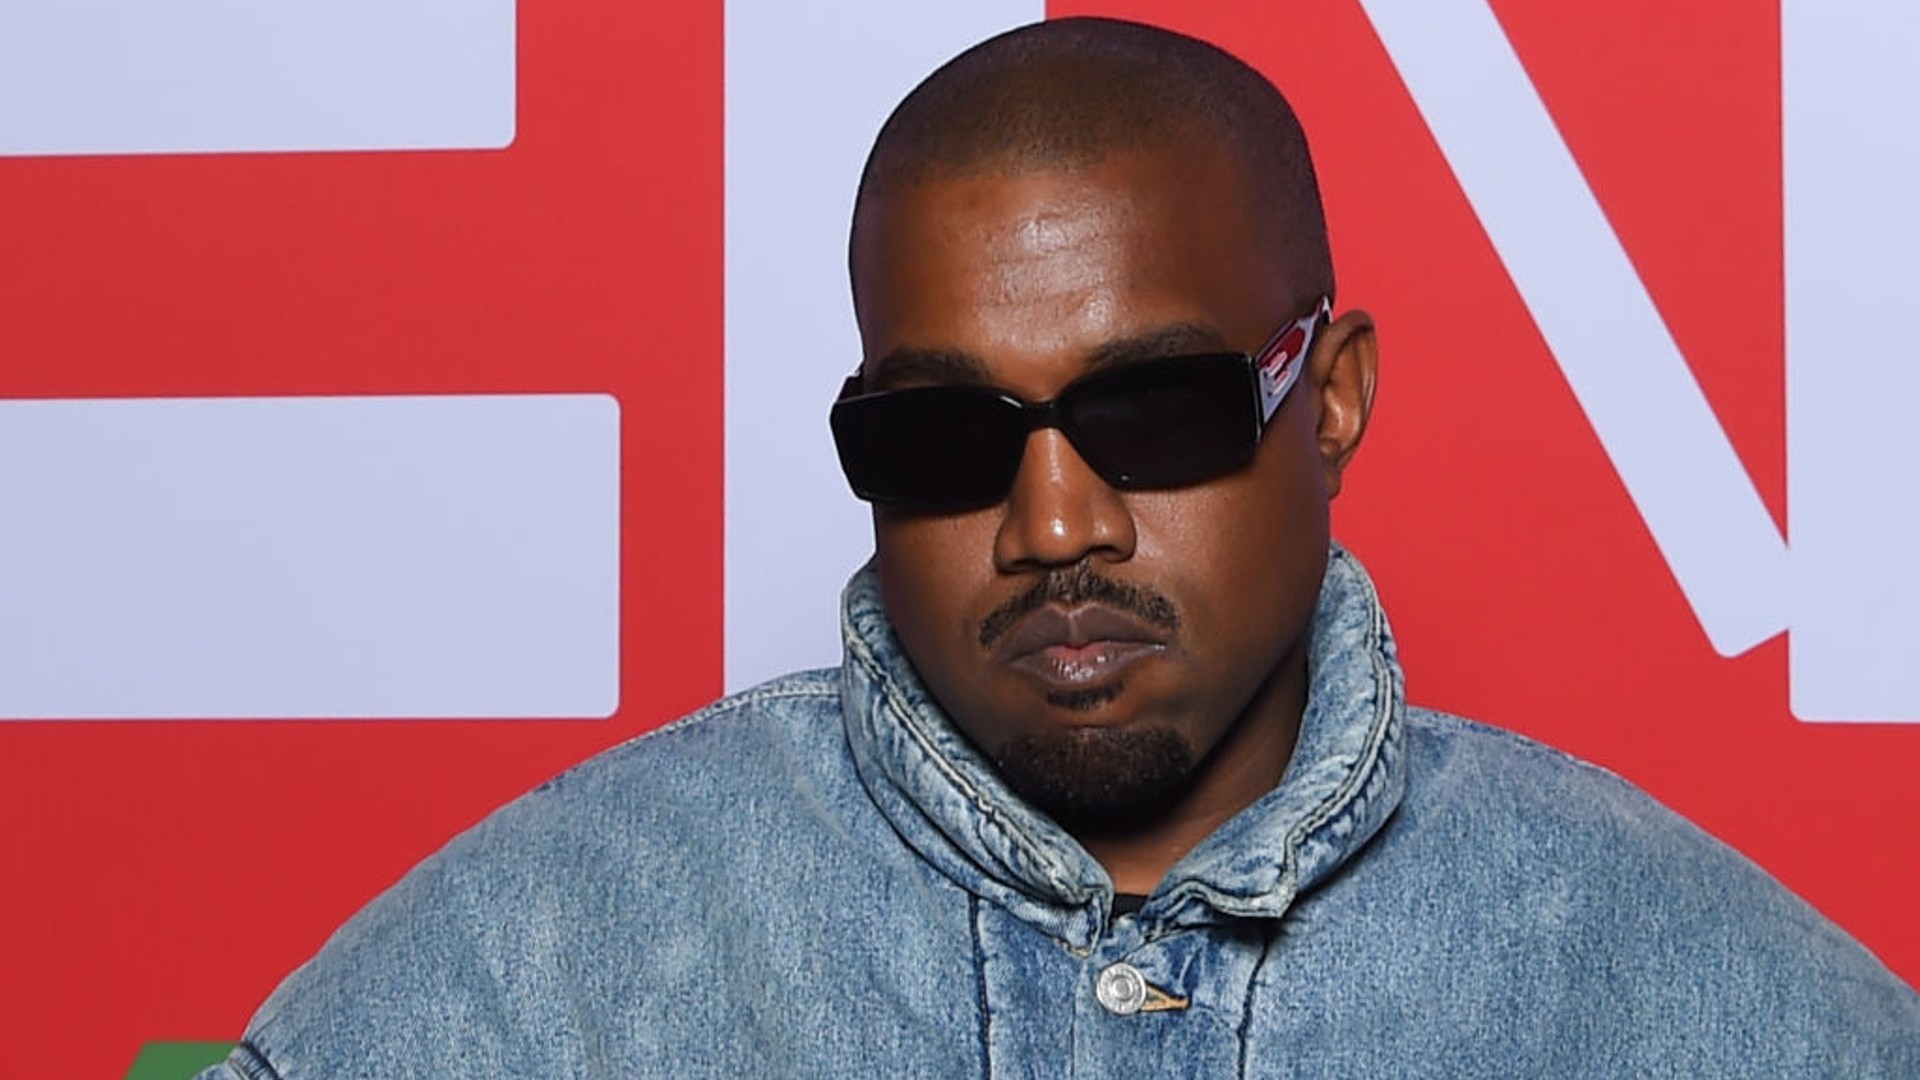 They Cost How Much!? Kanye West’s New Yeezy ‘Sock Shoe’ Sparks Social Media Reactions thumbnail